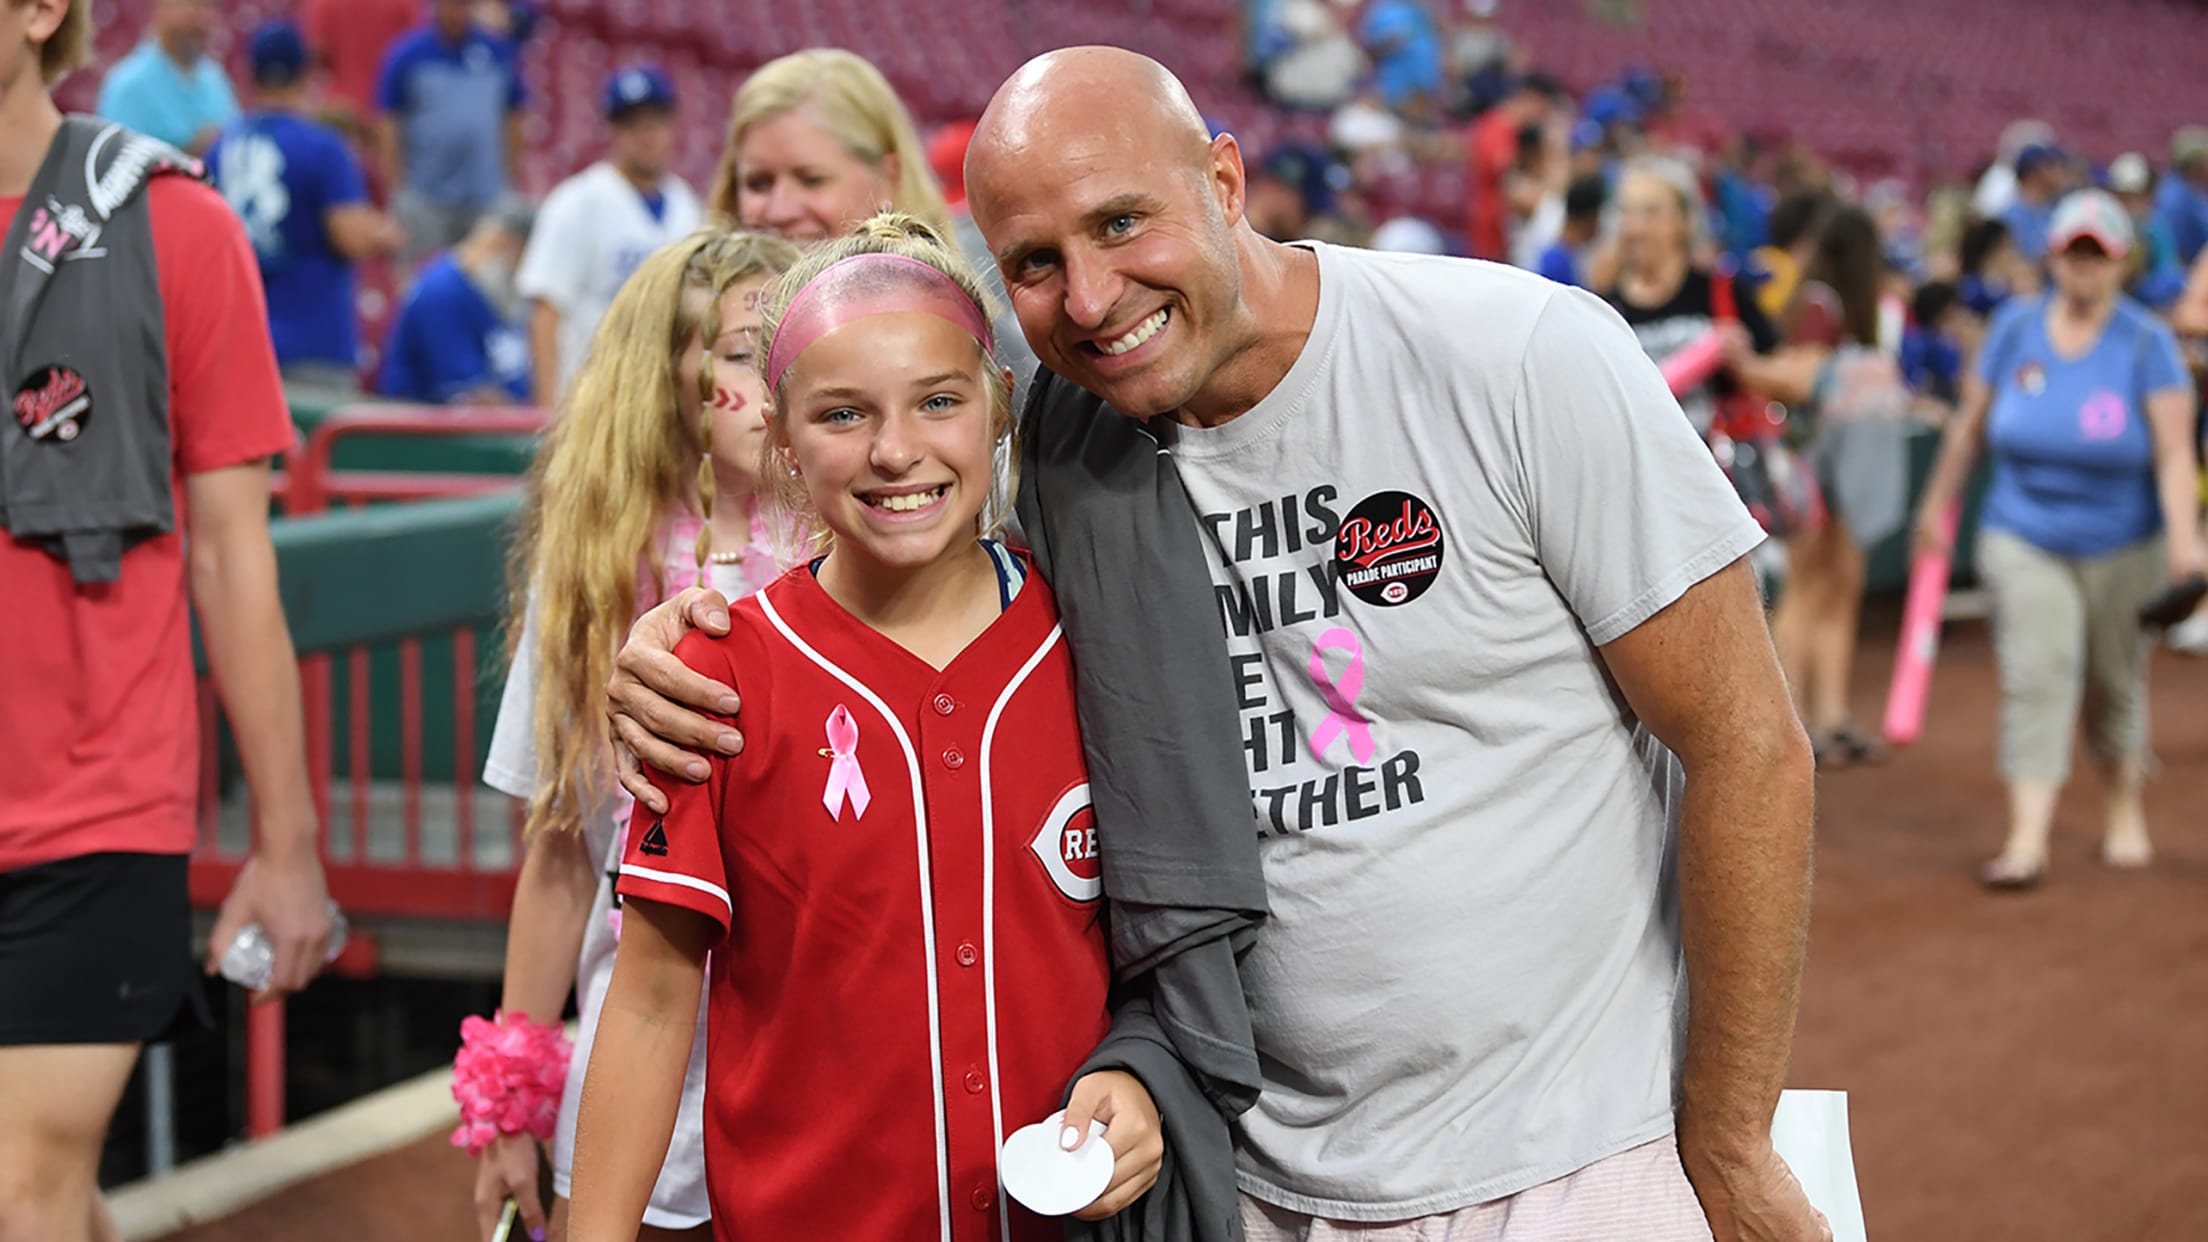 Cincinnati Reds on X: Greater Cincinnati's cancer care, support and  survivor communities will come together at today's game to Knock Cancer Out  of the Park. Before the game, join us from 1:00-3:30